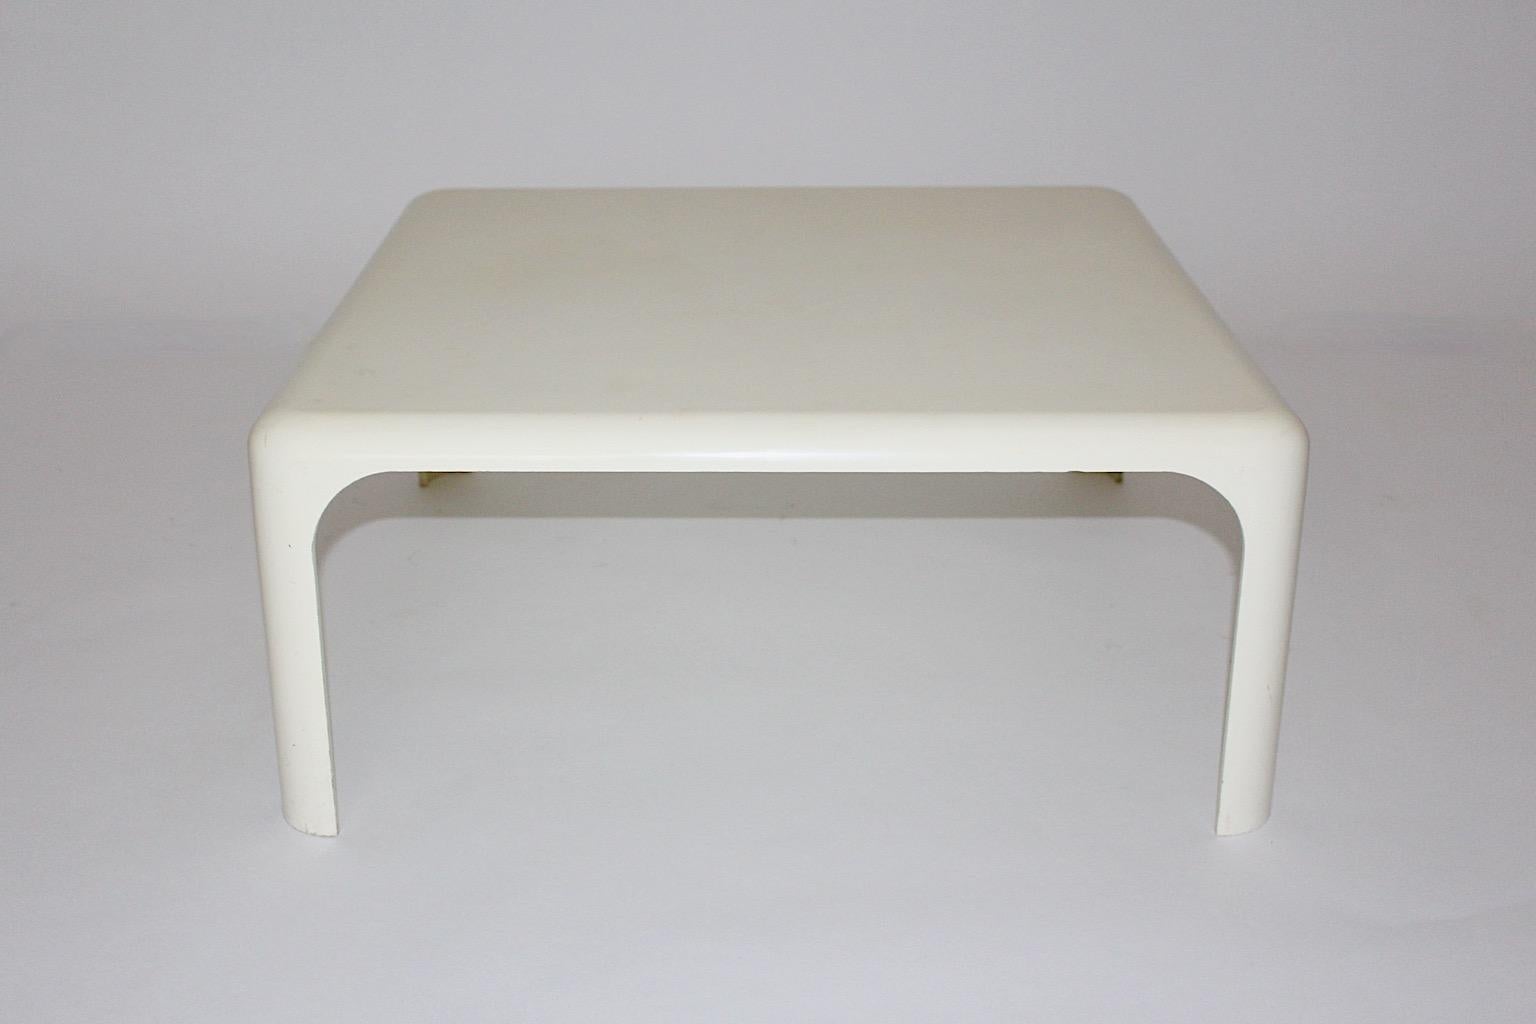 Space Age vintage rectangular sofa table model Demetrio 70 from plastic in white color by Vico Magistretti, 1960s Italy.
An iconic and authentic sofa table or side table in rectangular shape from plastic in elegant white color by Vico